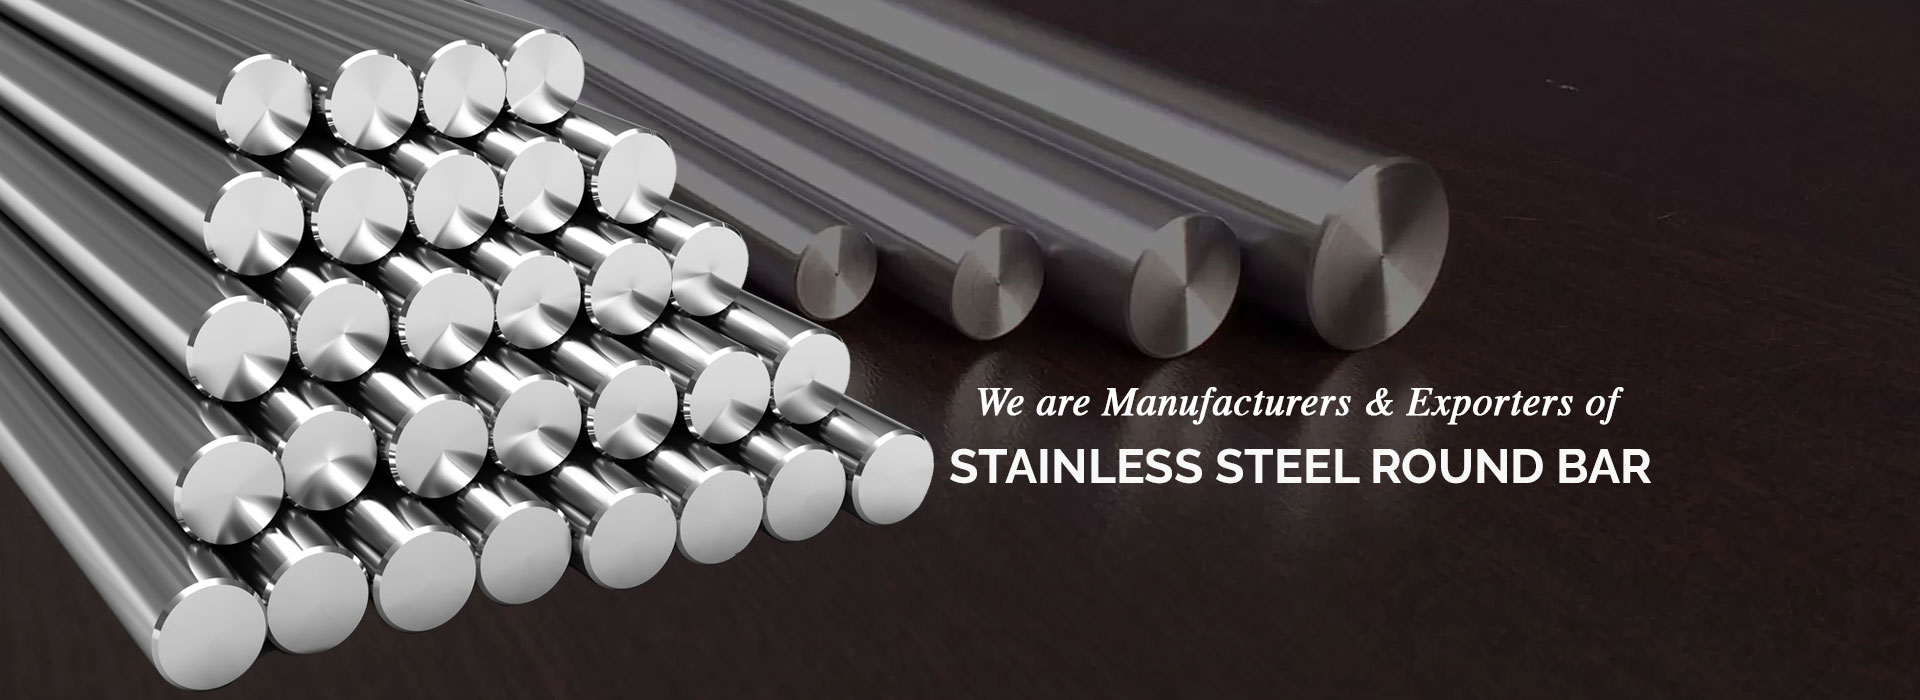 Stainless Steel Round Bar Manufacturers in Brazil